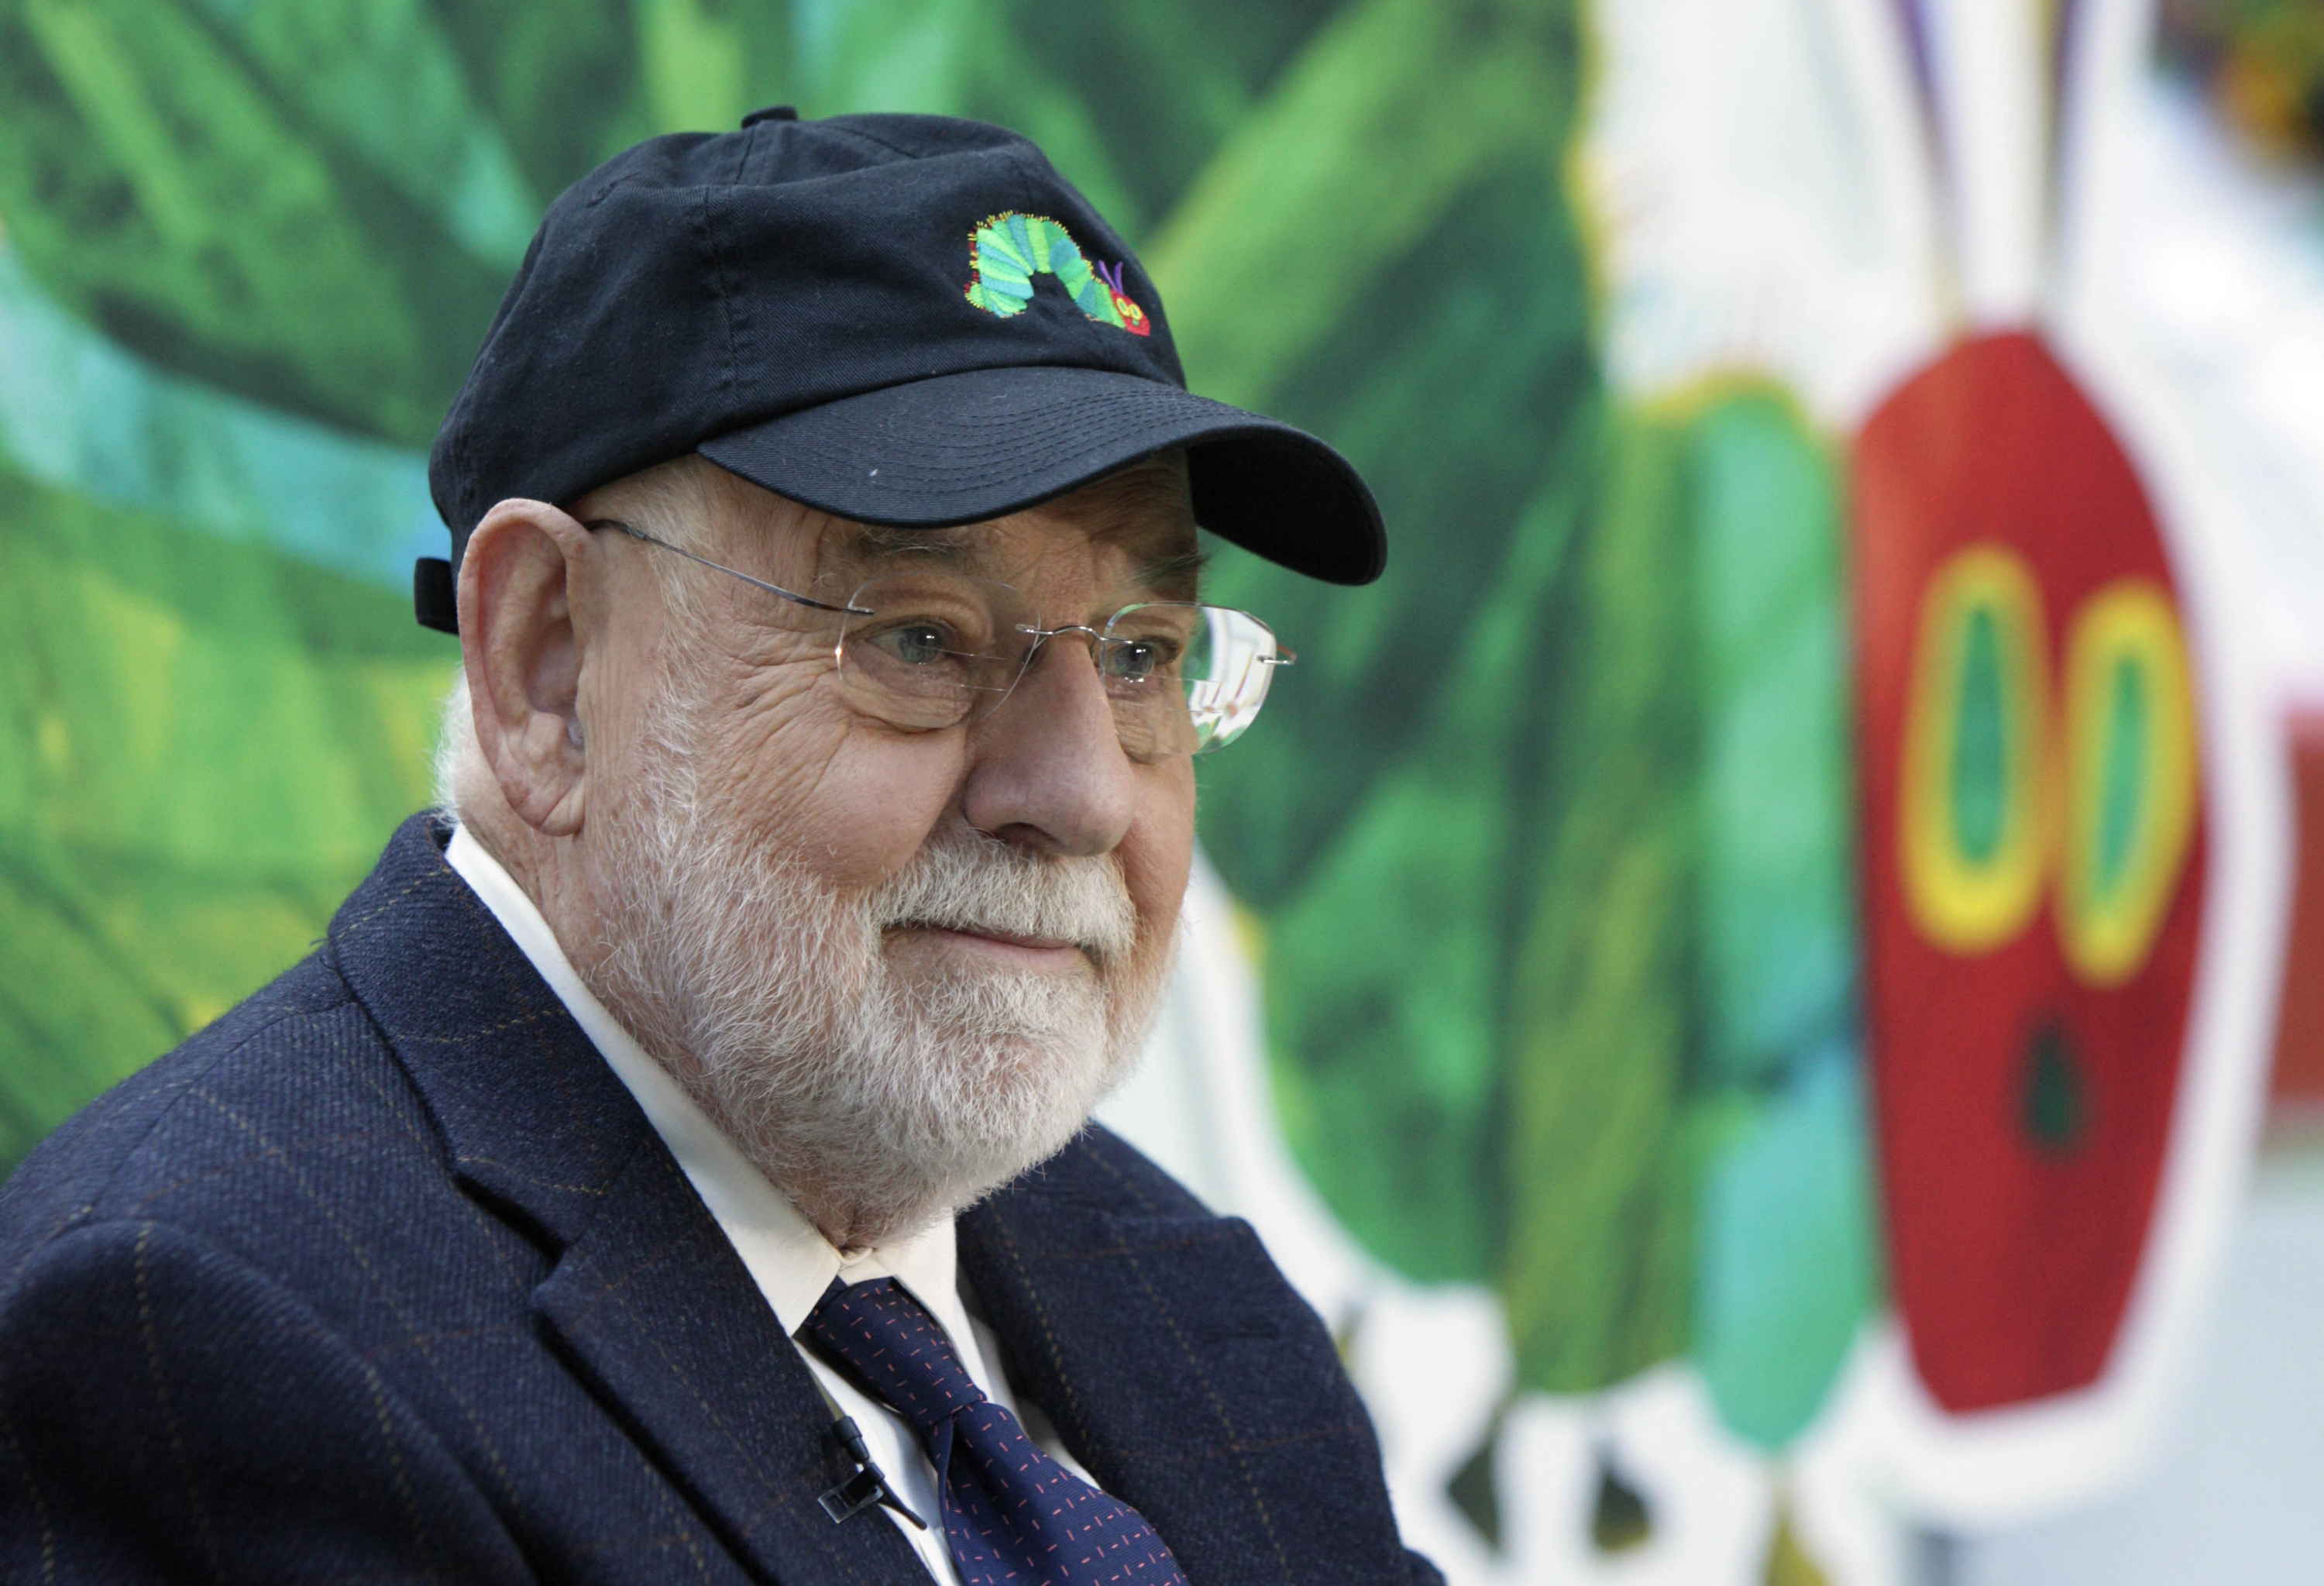 The Very Hungry Caterpillar' author Eric Carle dies at 91